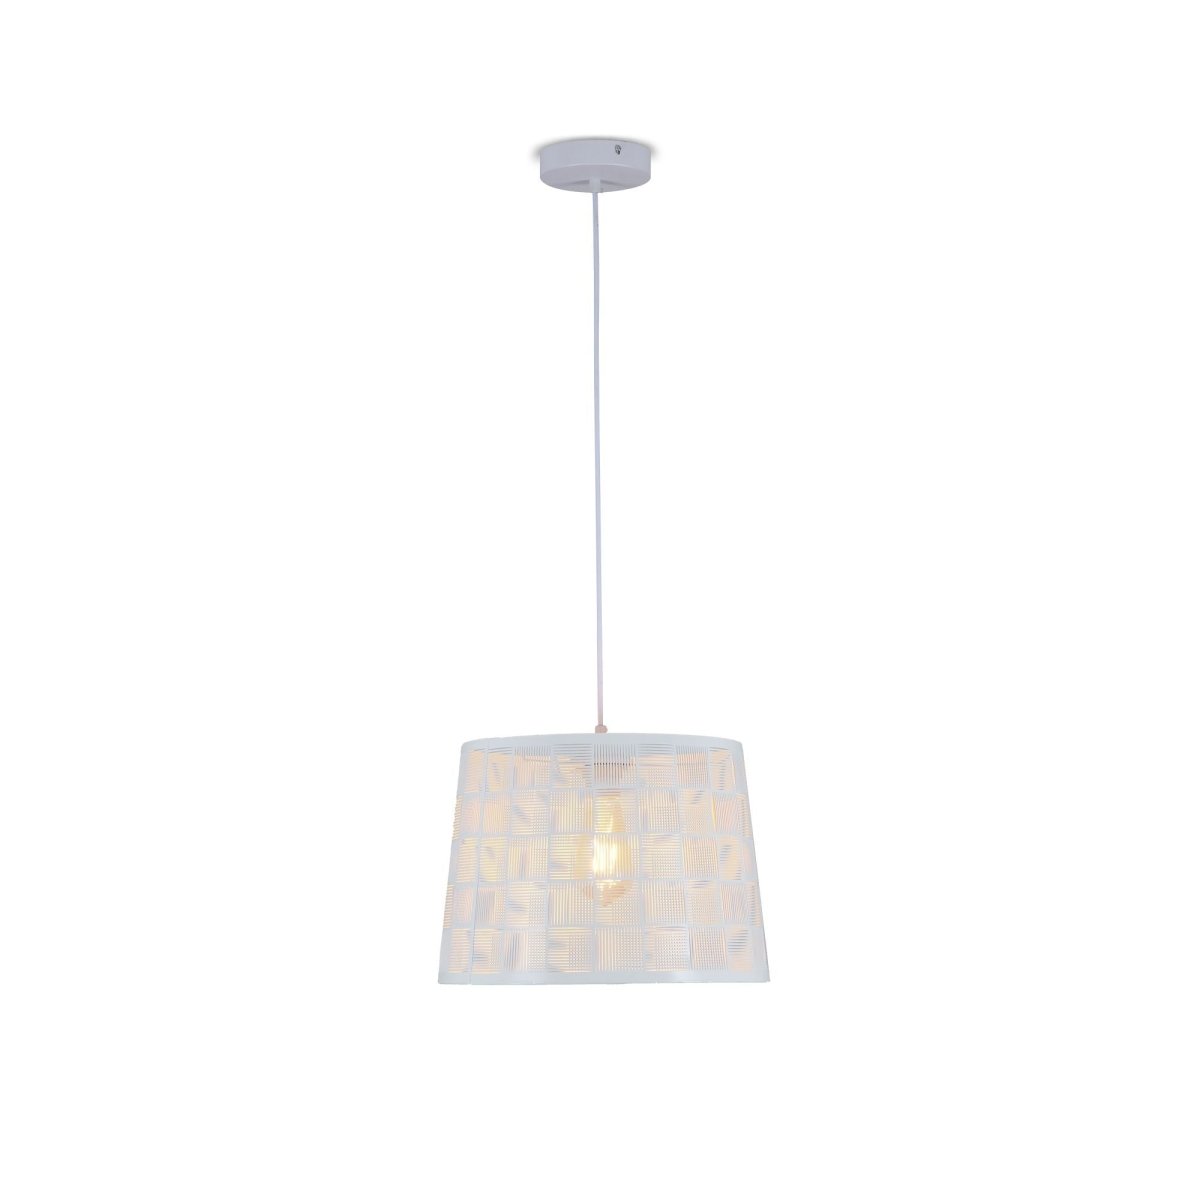 White metal frustum pendant light square pattern with e27 fitting in indoor setting